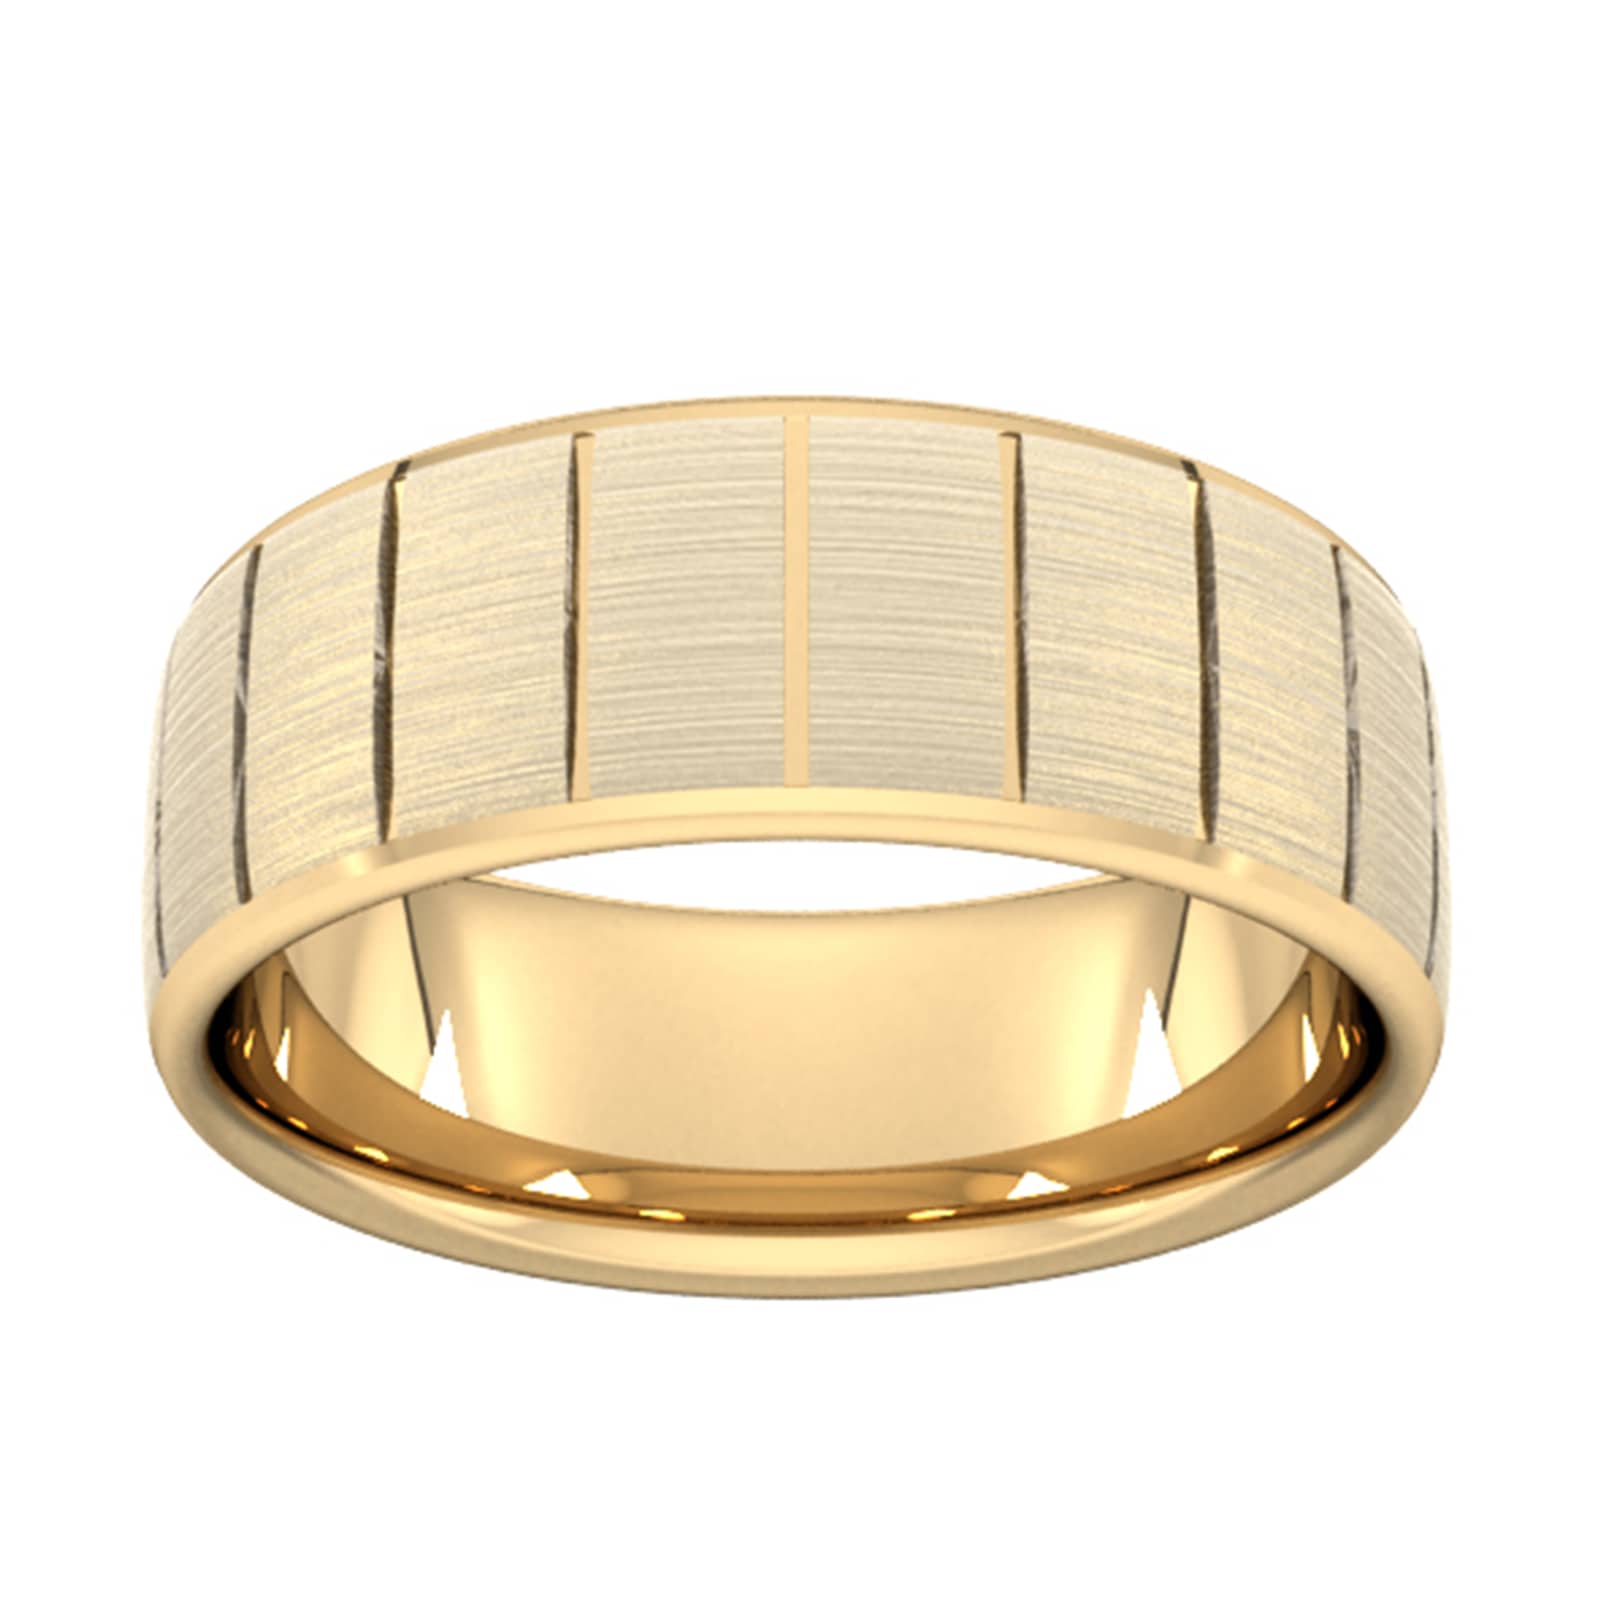 8mm Slight Court Extra Heavy Vertical Lines Wedding Ring In 9 Carat Yellow Gold - Ring Size G